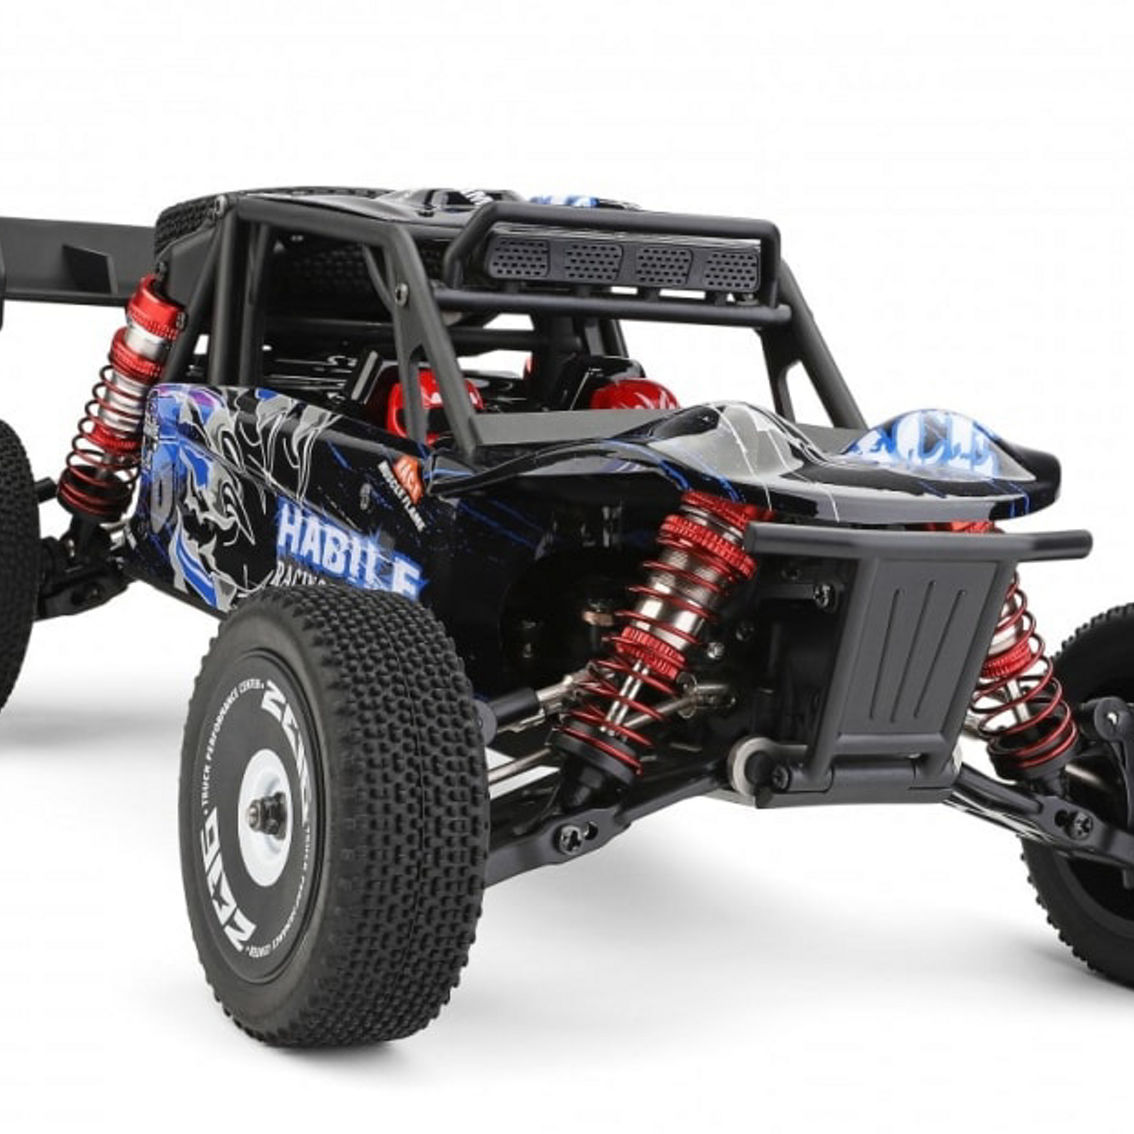 CIS-124018 1:12 scale monster truck 4WD - Image 3 of 5